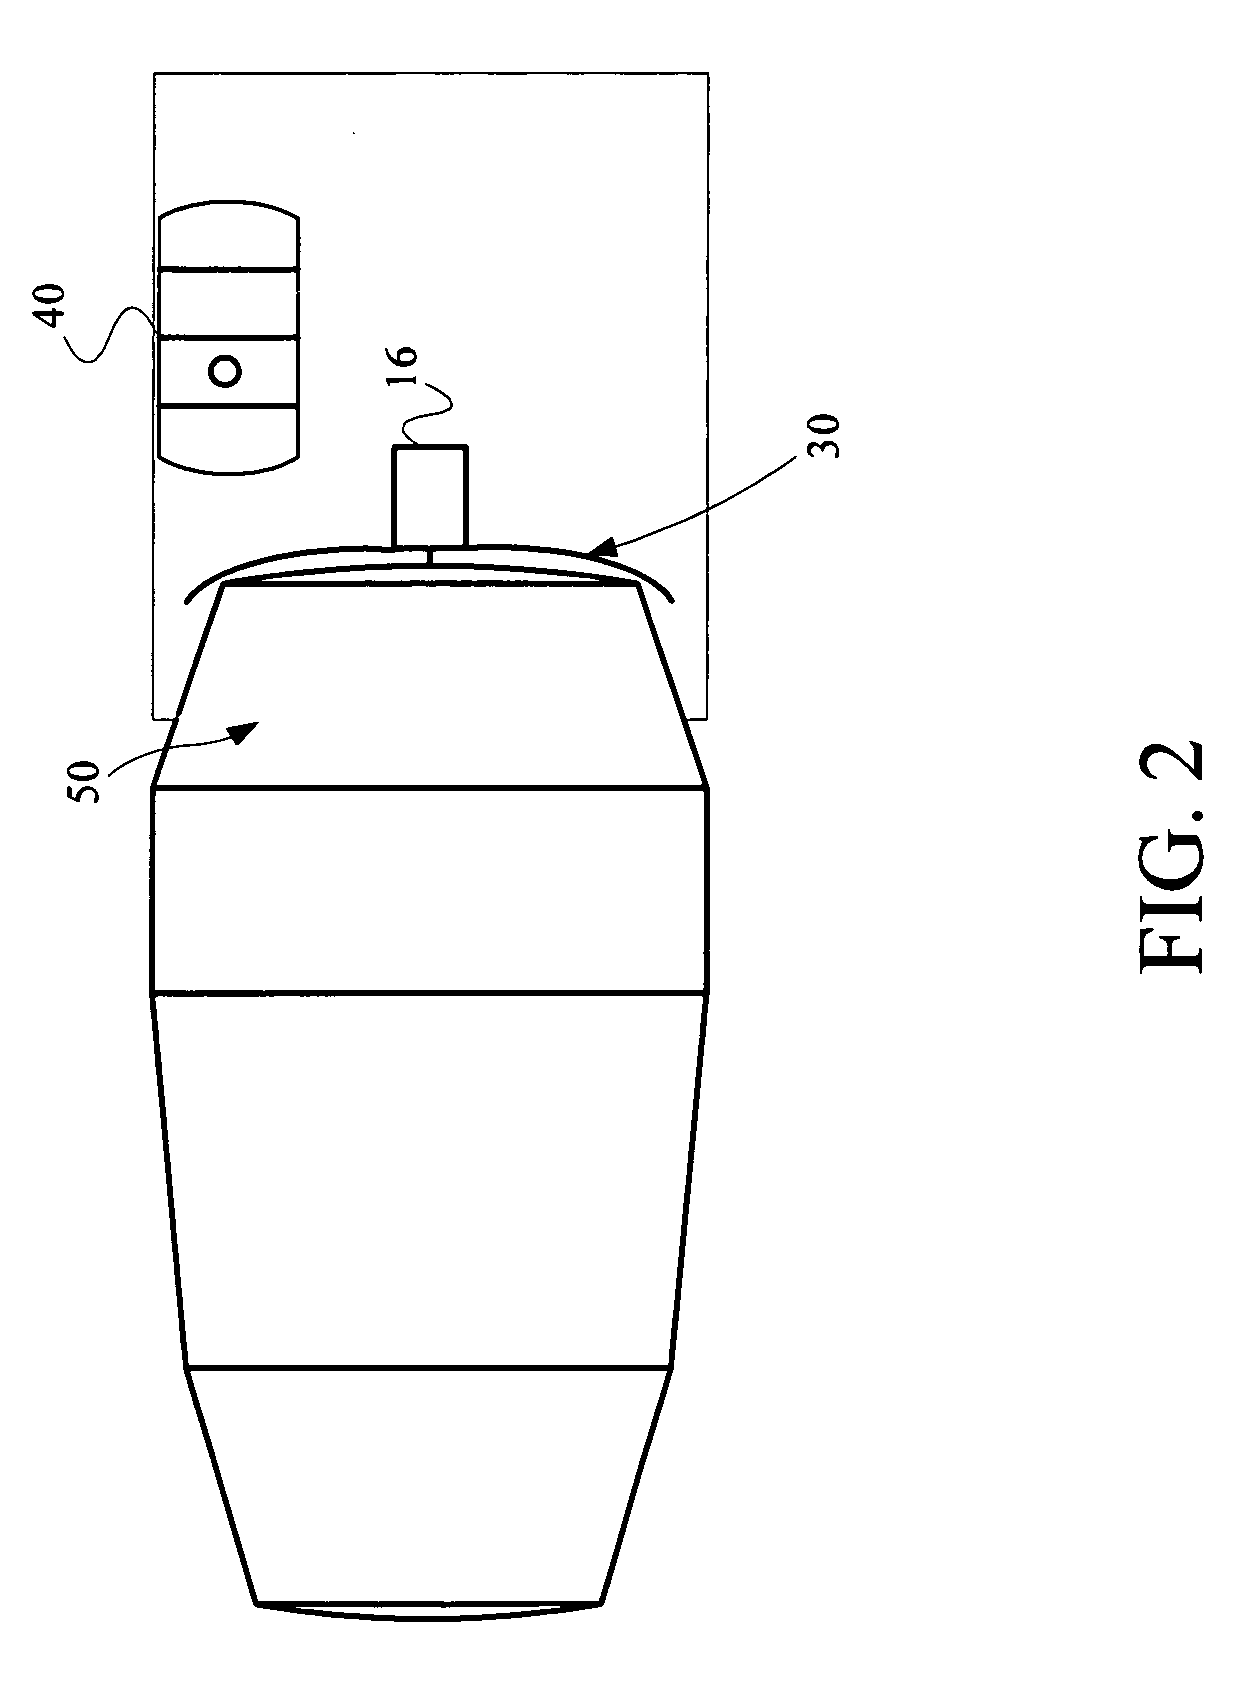 Apparatus for the thermal conditioning of concrete